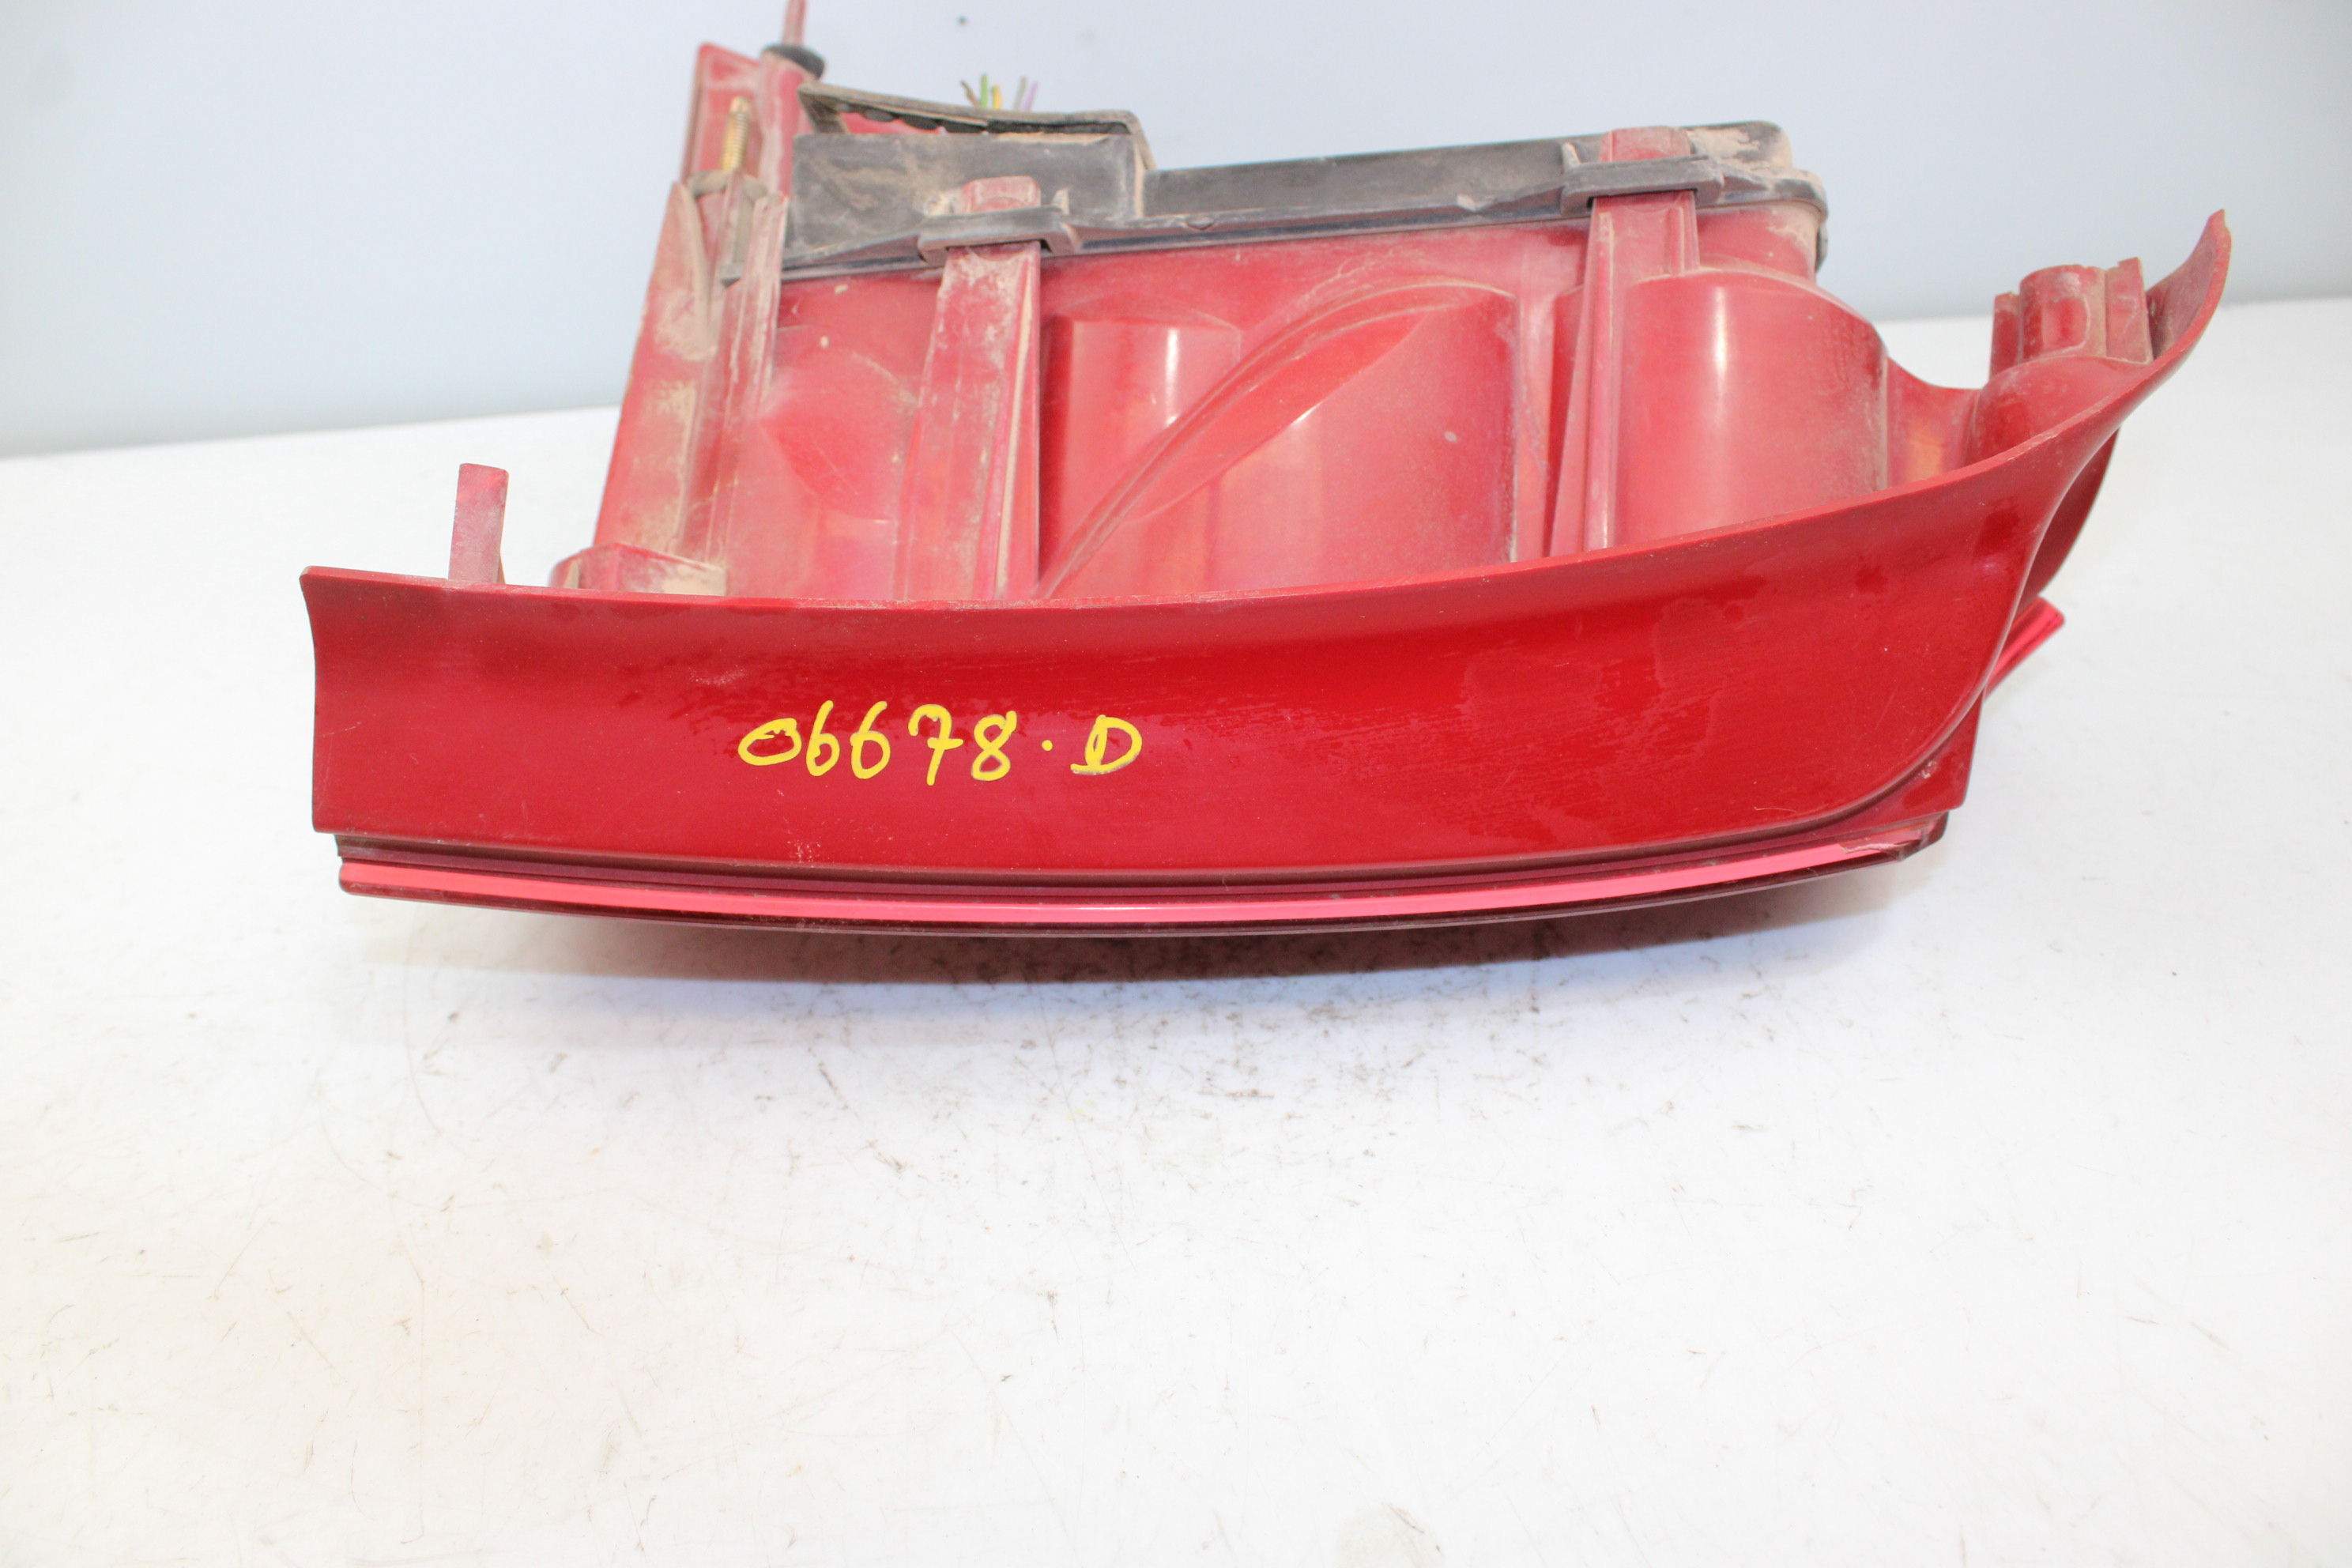 IVECO 307 1 generation (2001-2008) Rear Right Taillight Lamp NOTIENEREFERENCIA 25267350